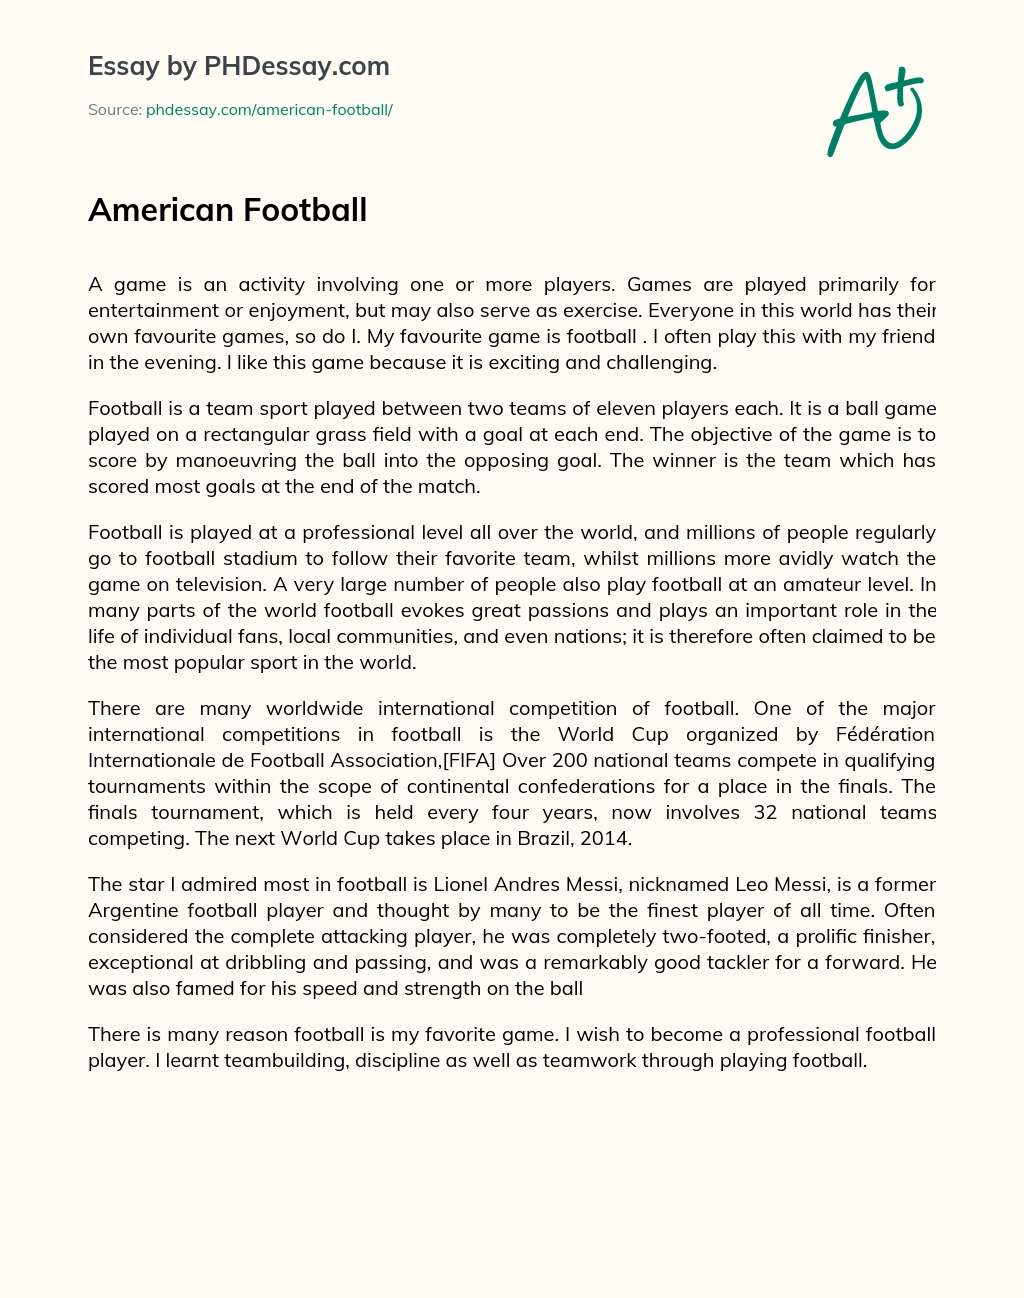 Реферат: Professional Football In America Essay Research Paper